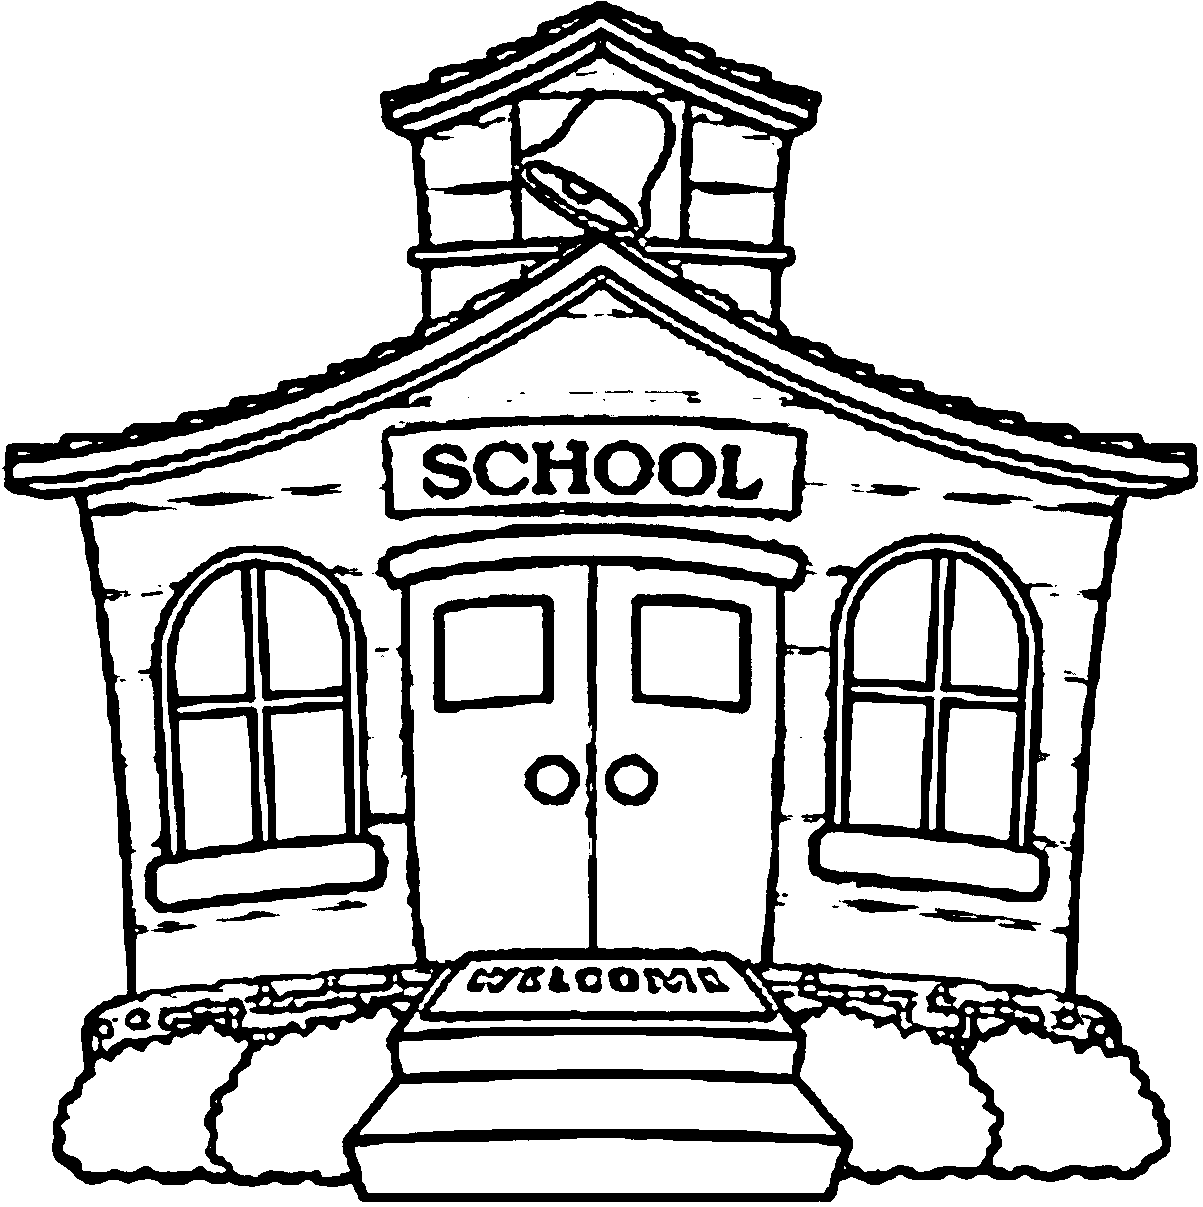 Coloring Page Of A School Building   Coloring Home